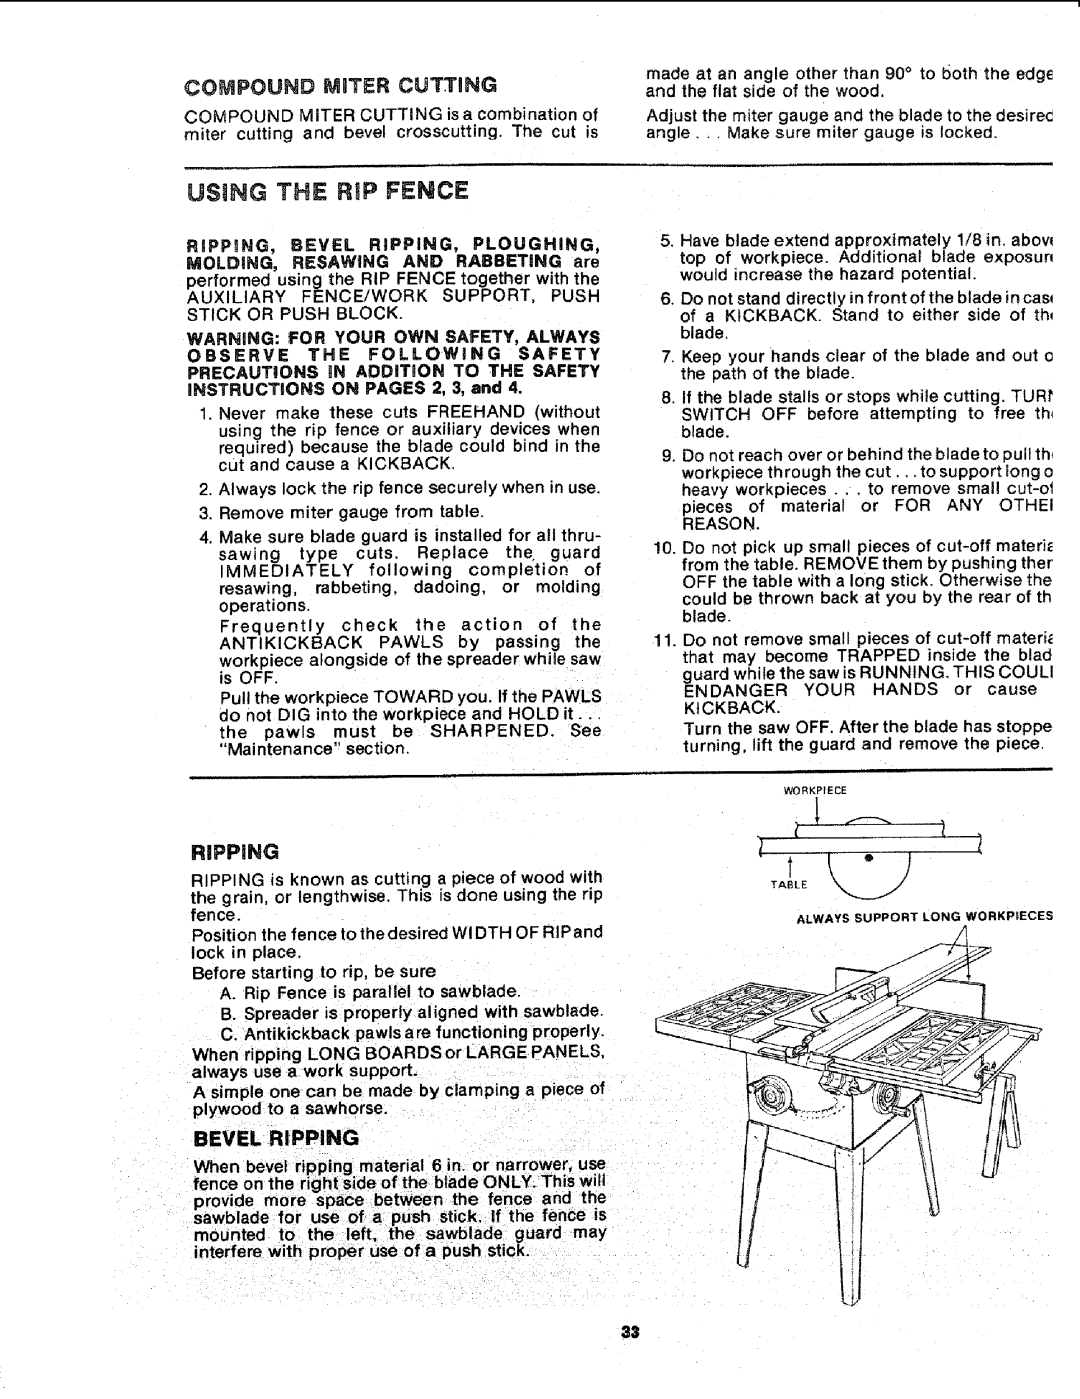 Sears 113.241591 owner manual USING THE RmPFENCE, Compound Moter Cutting, RiPPiNG, Bevel Ripping 